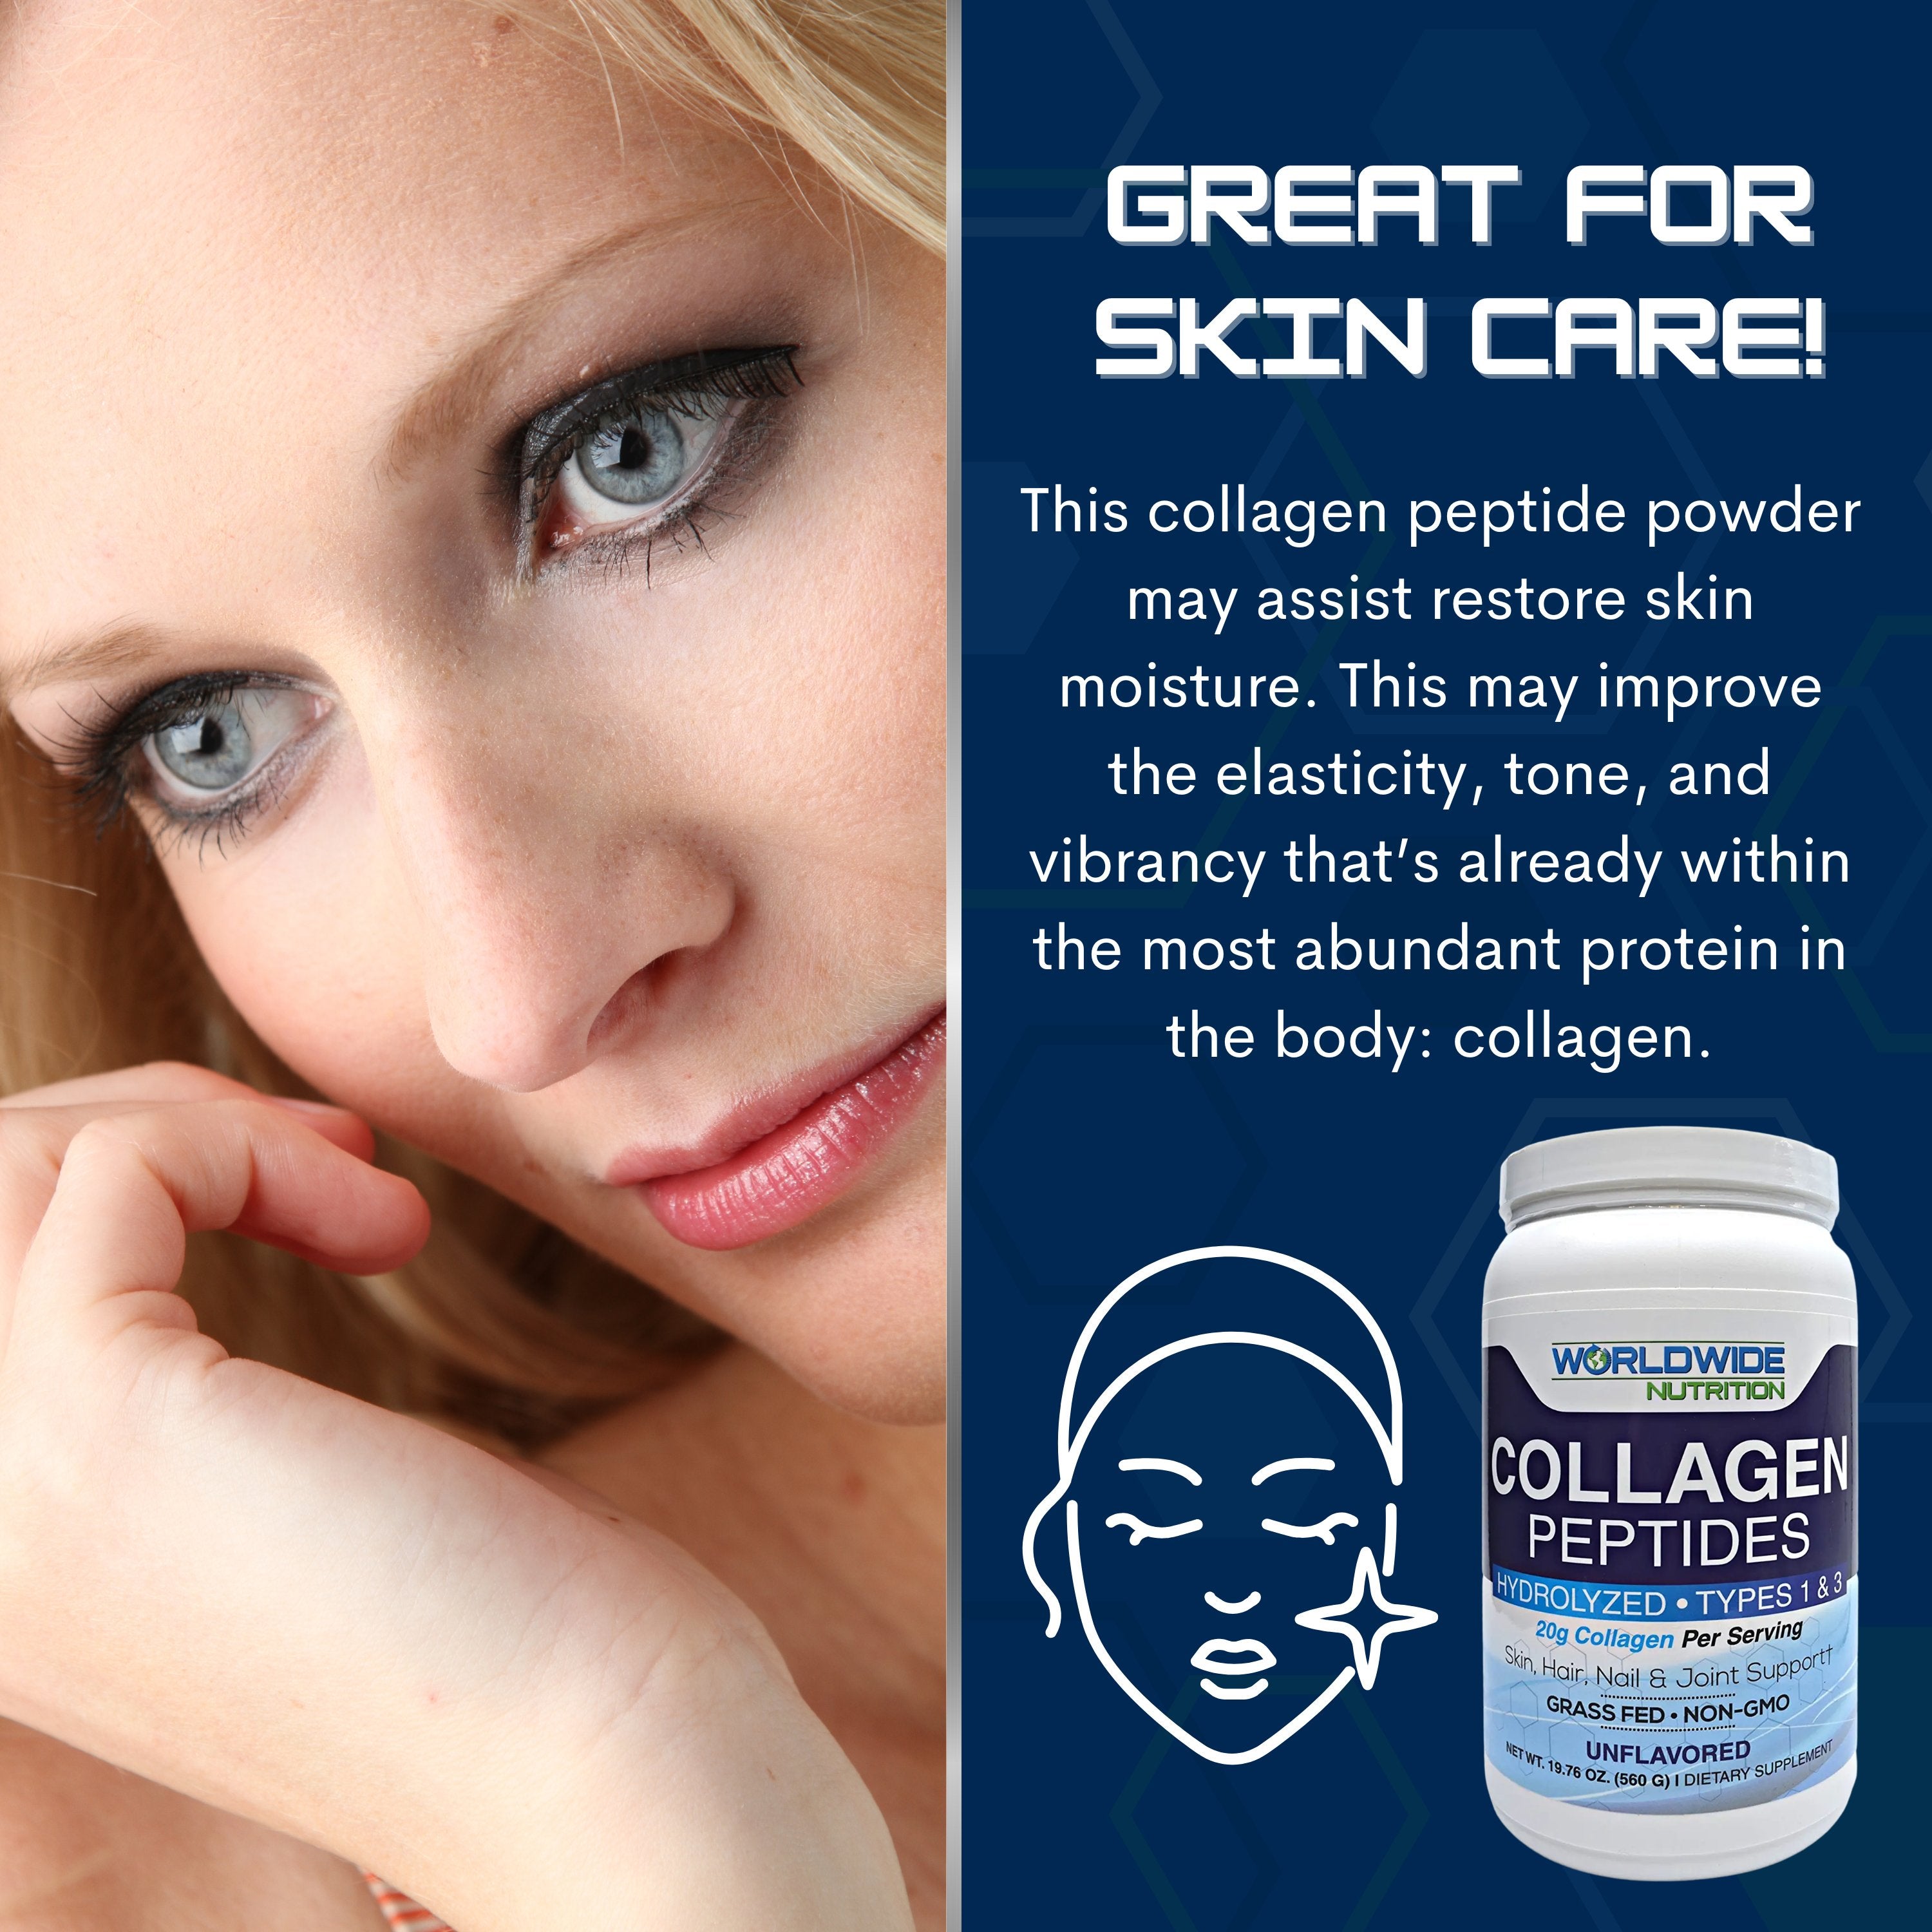 Worldwide Nutrition Collagen Peptides - Hydrolyzed Collagen 1 and 3 - Skin, Hair, Nail, and Joint Support - Grass Fed, Gluten Free, Non GMO, and Keto Collagen - Odorless Unflavored Collagen - 28 Serv.